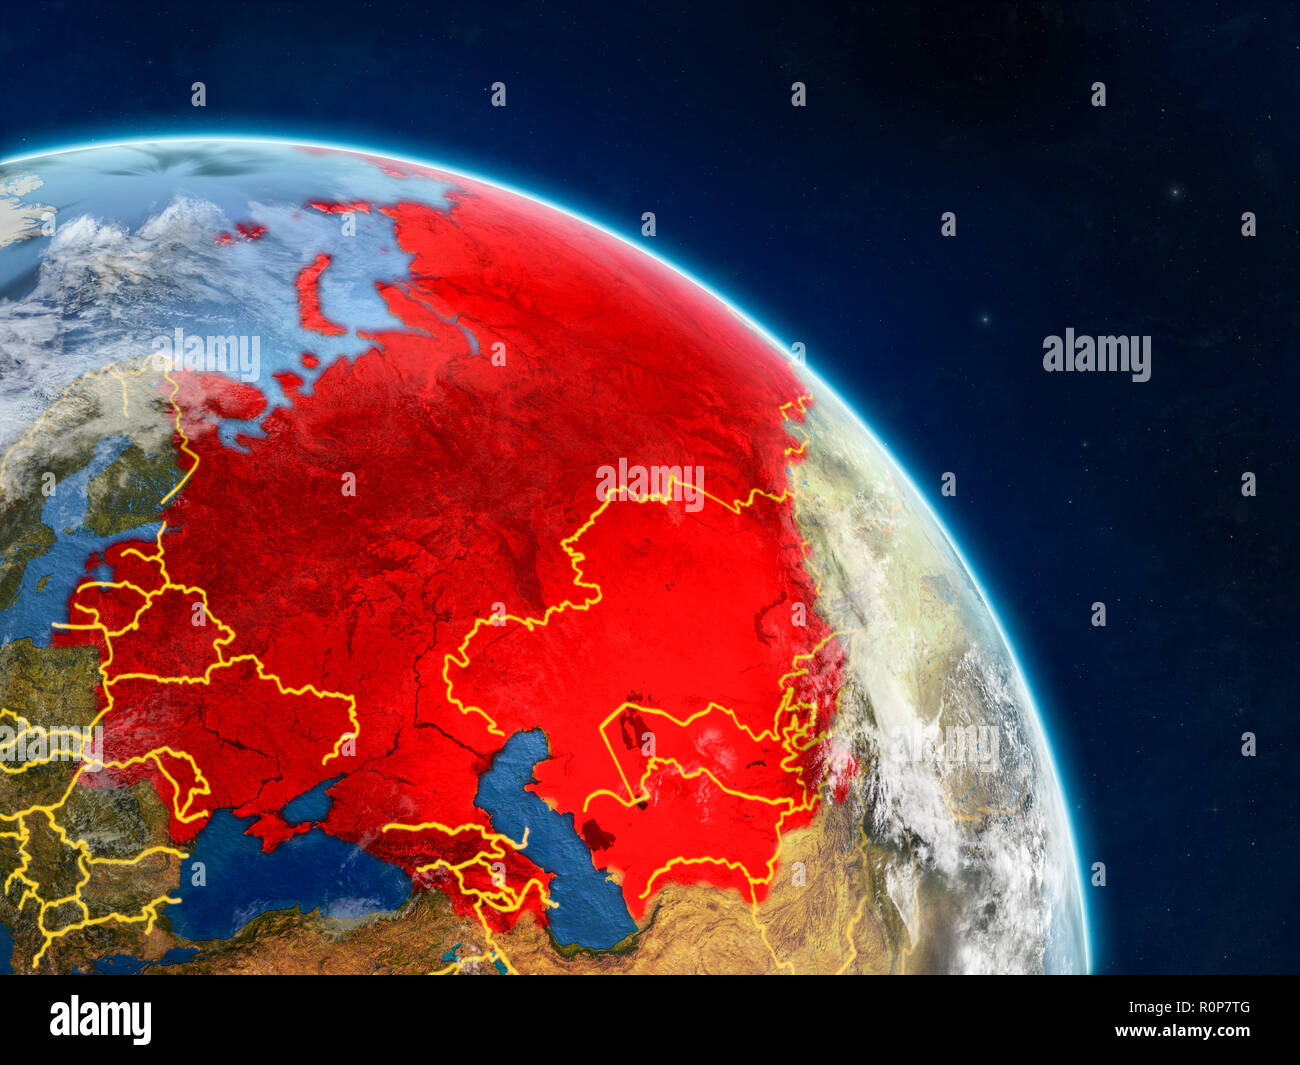 Former Soviet Union From Space On Realistic Model Of Planet Earth With Country Borders And Detailed Planet Surface And Clouds 3d Illustration Elemen Stock Photo Alamy